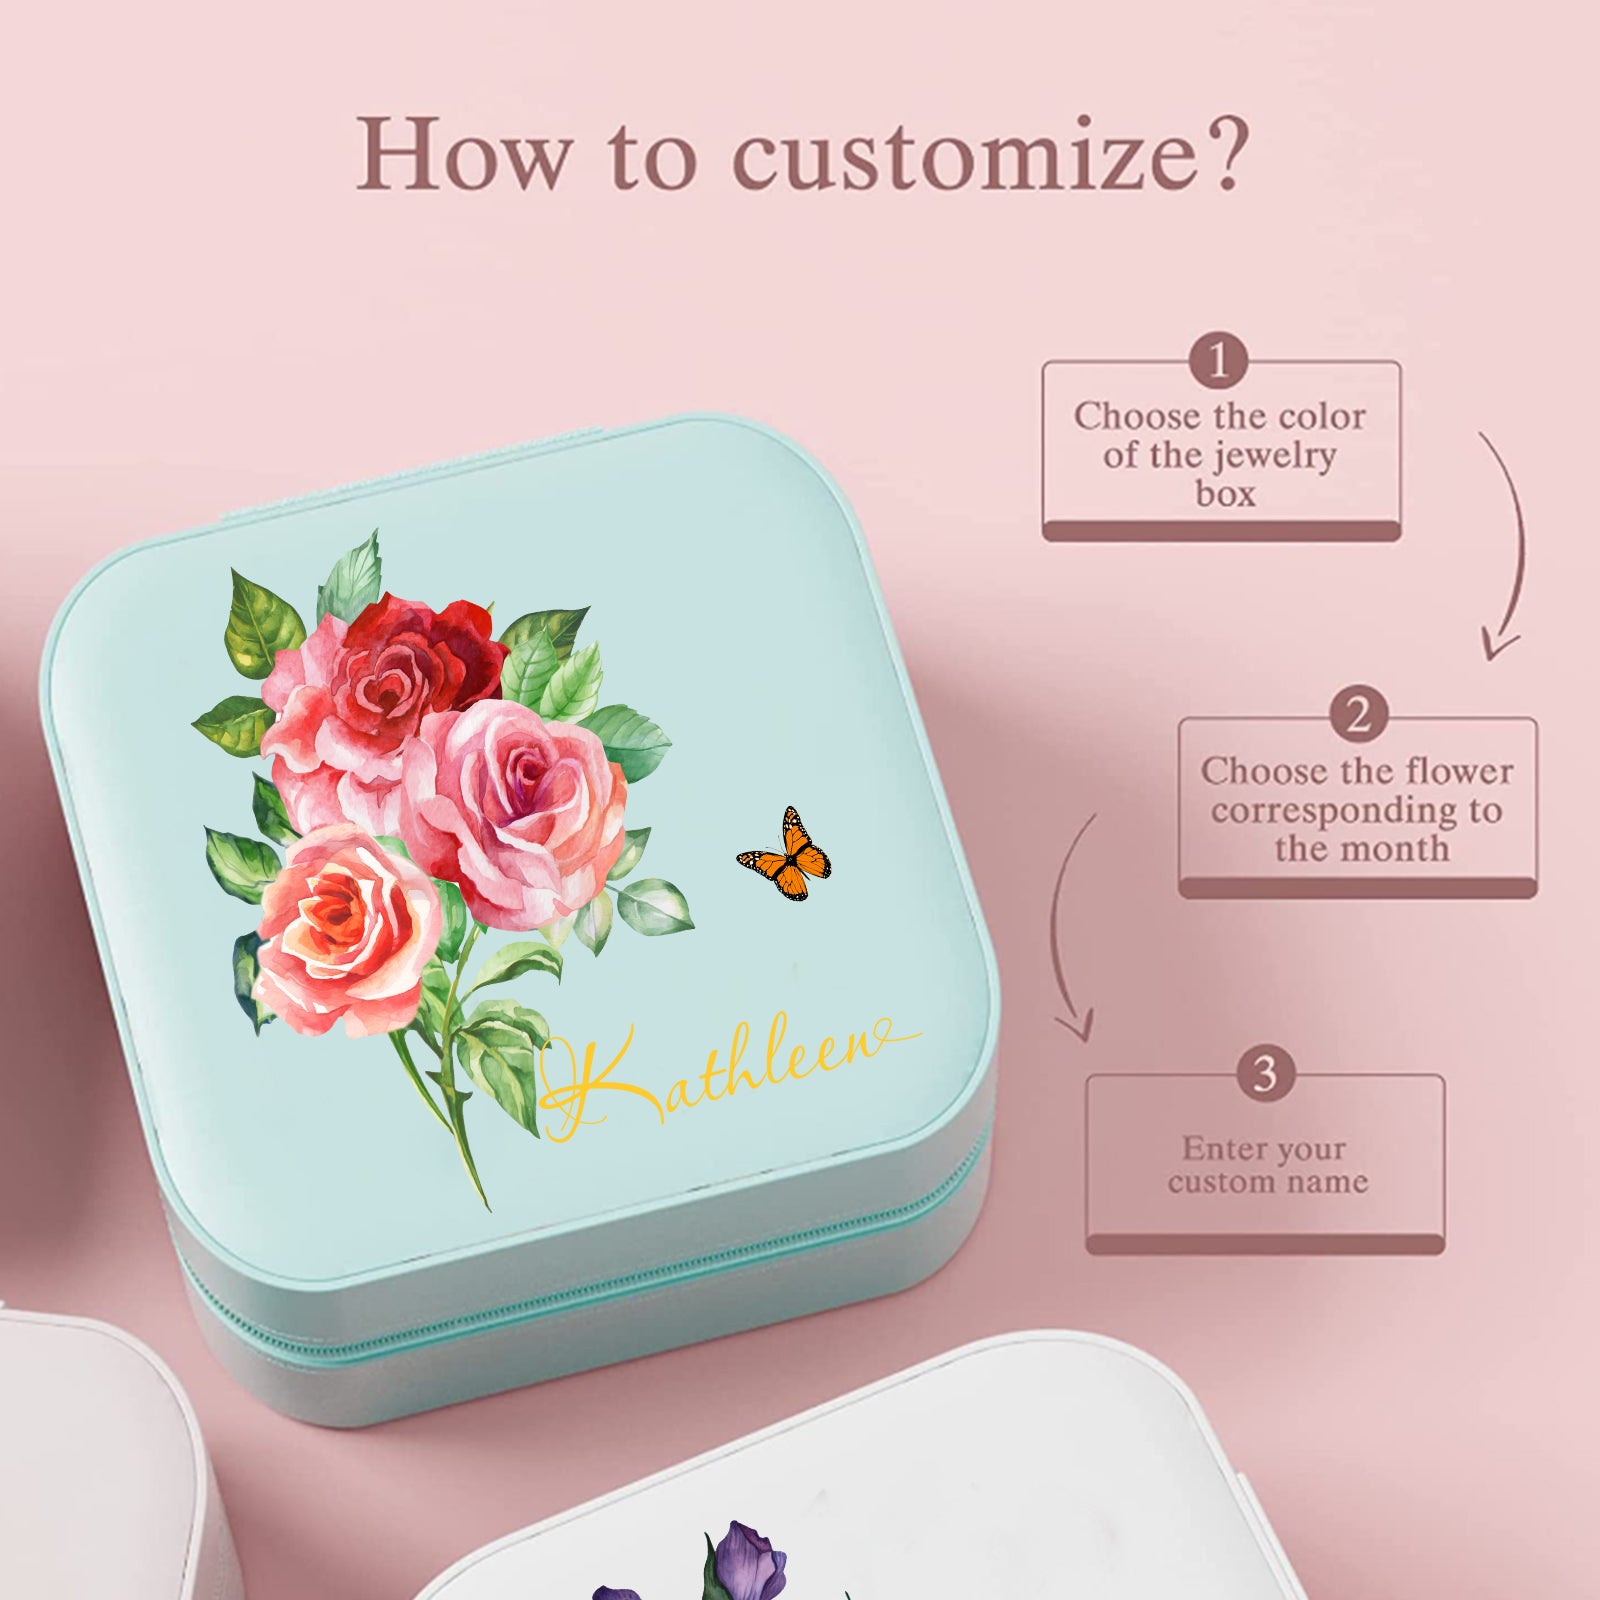 Personalized jewelry box with birth flower & name-Best Mother's Day Gifts- ideal for women’s gifts - colorfulcustom